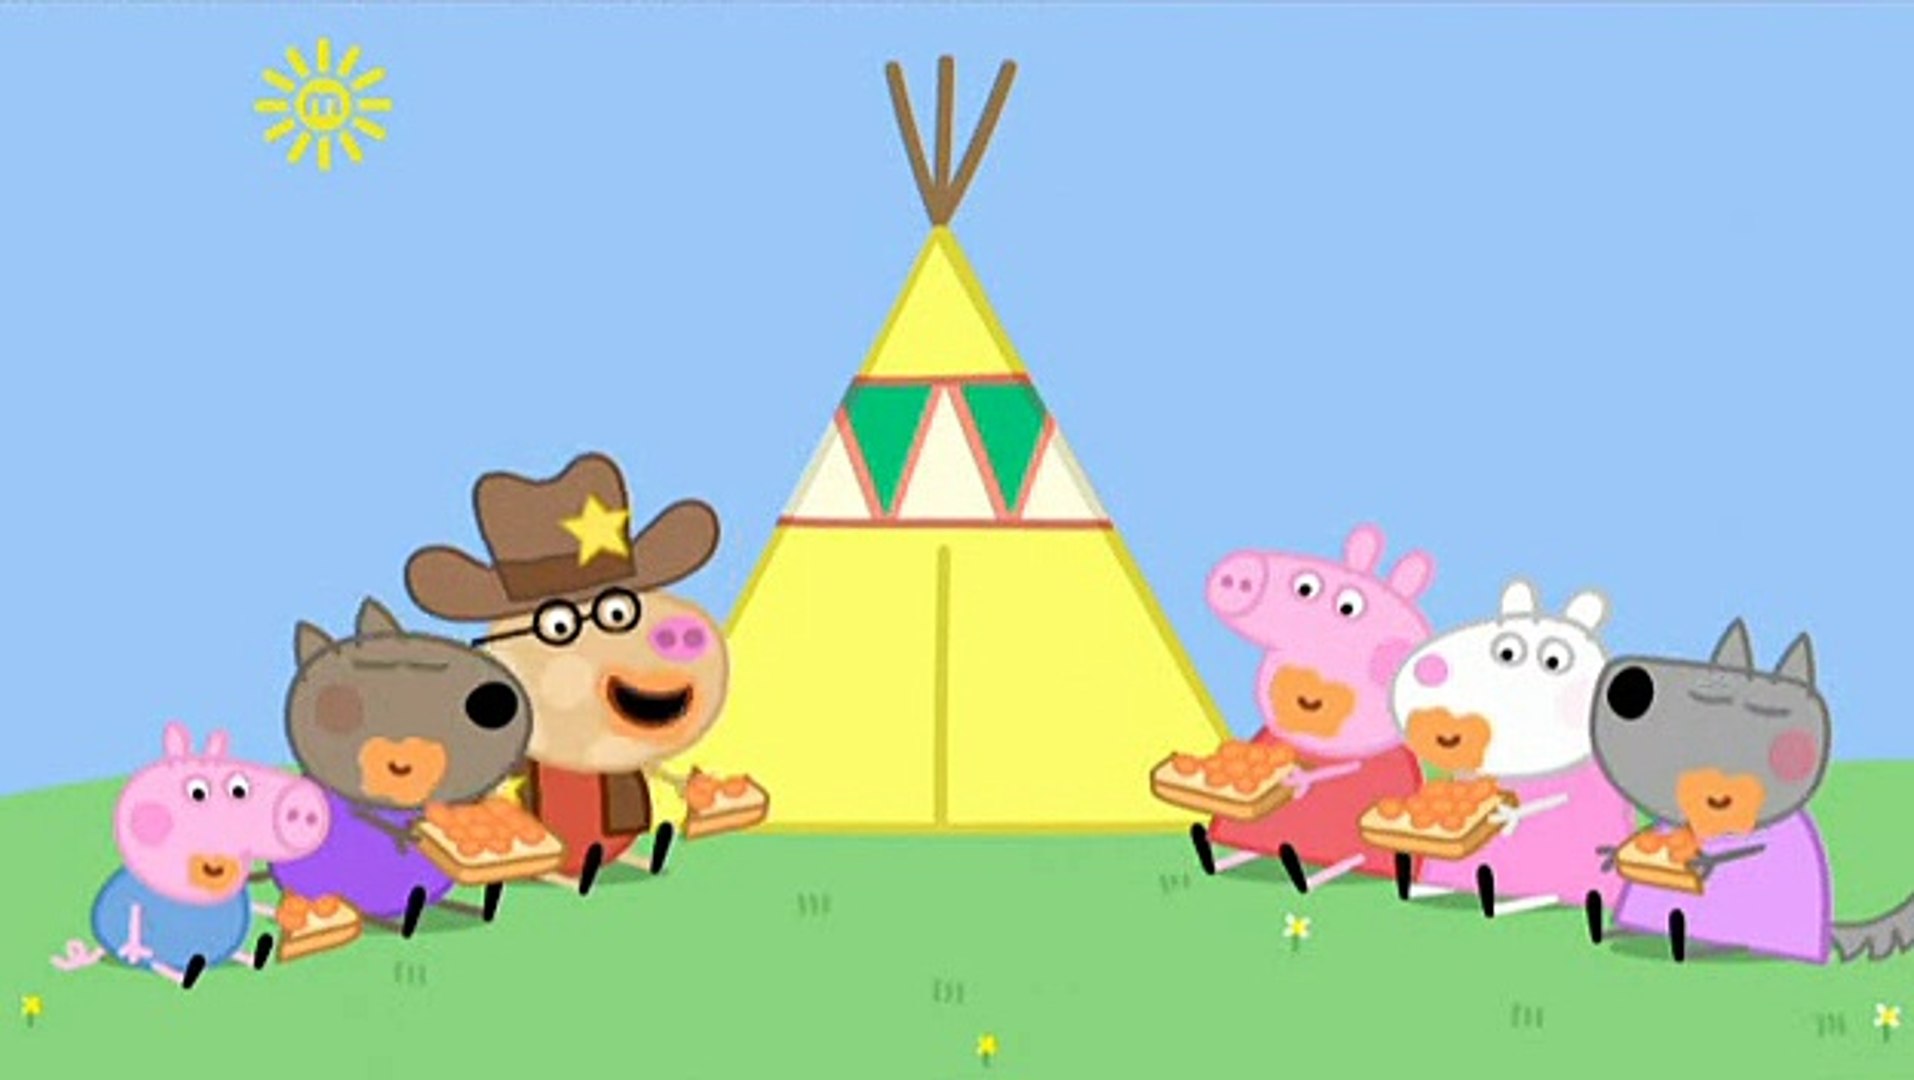 Peppa Pig. Pedro the Cowboy. Mummy Pig and Daddy Pig and George Pig